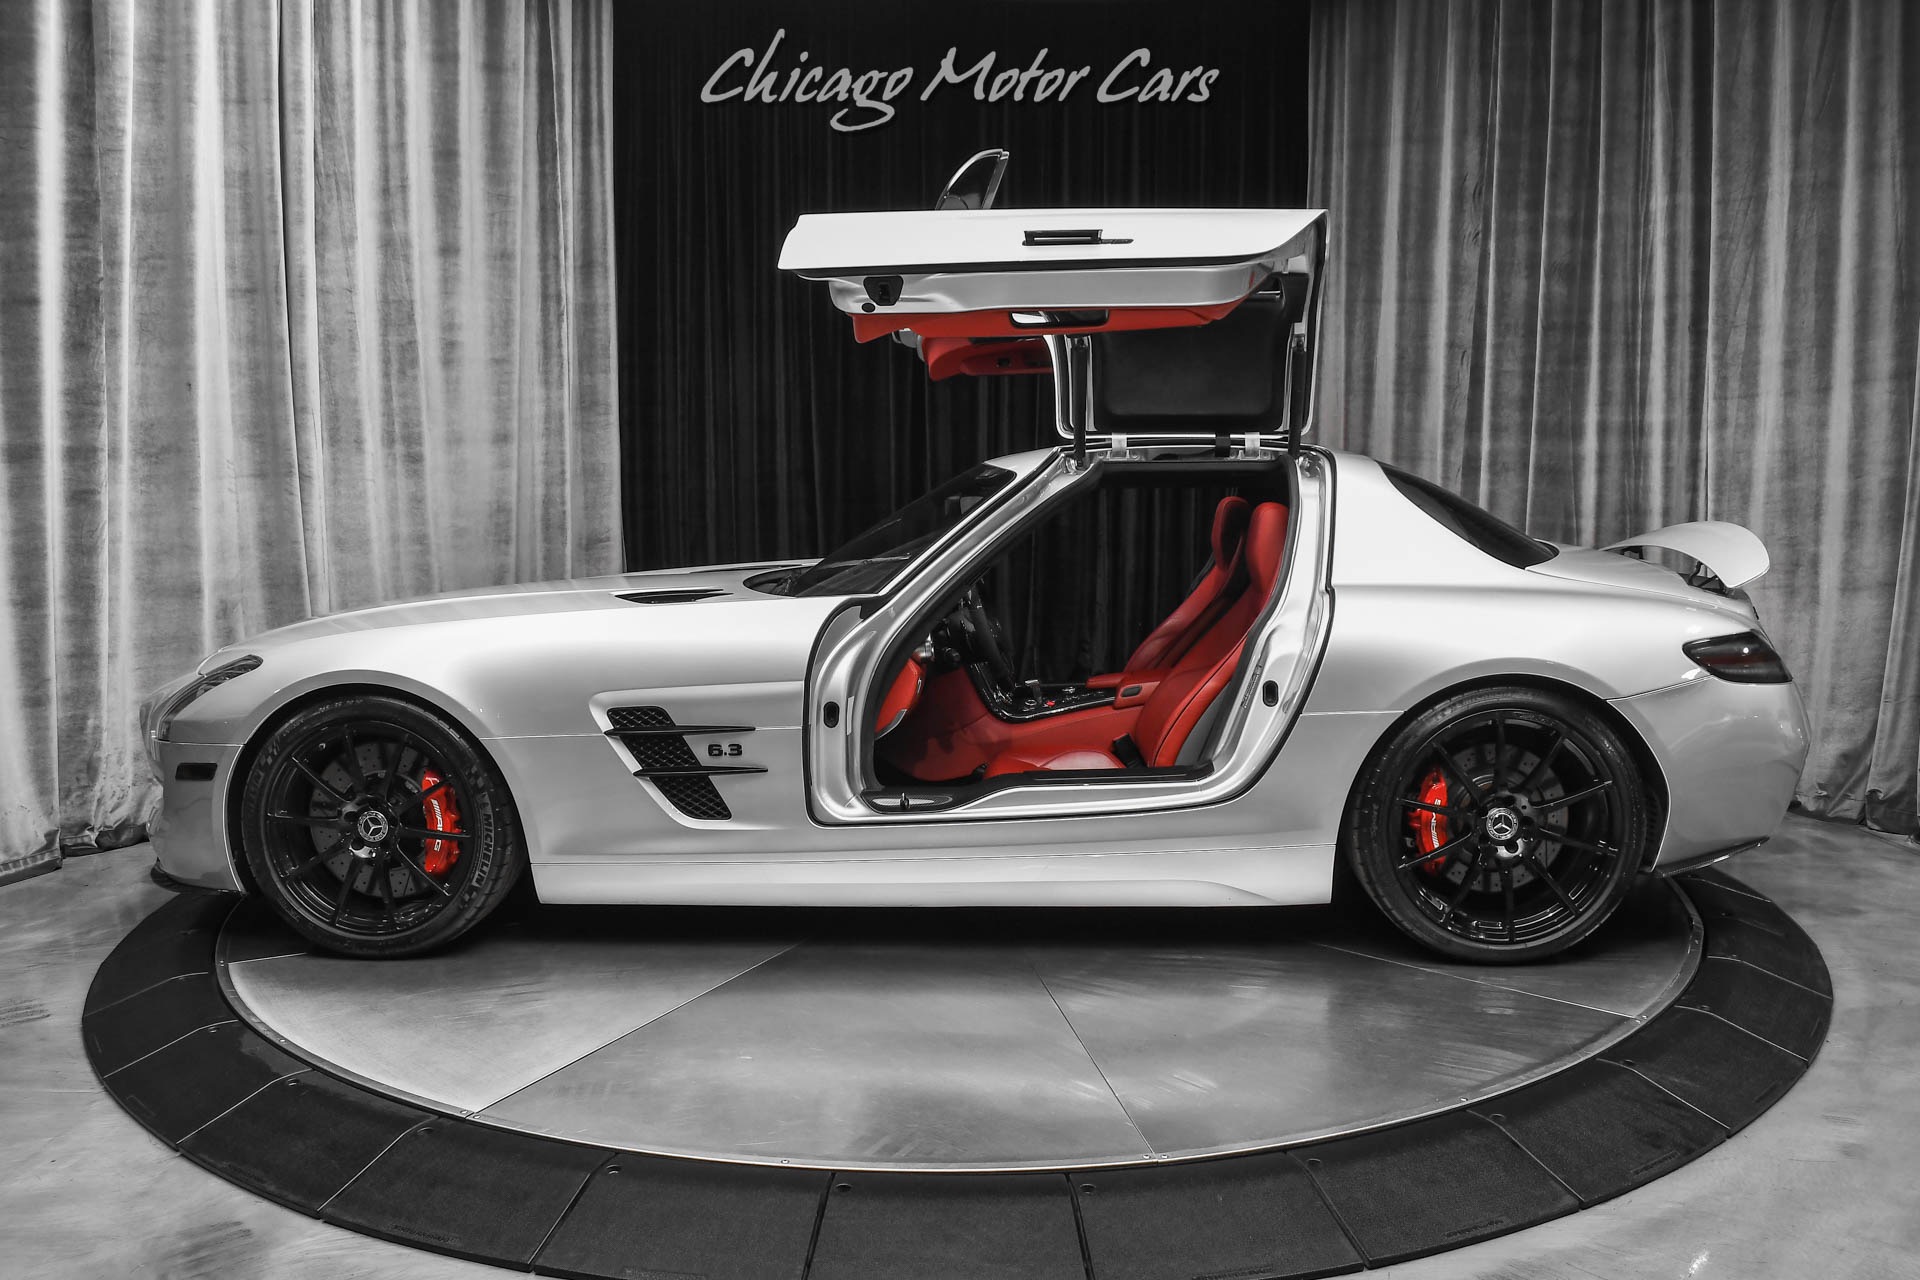 Used-2011-Mercedes-Benz-SLS-AMG-Gullwing-Coupe-RARE-HOT-Spec-TONS-of-Carbon-AMG-Suspension